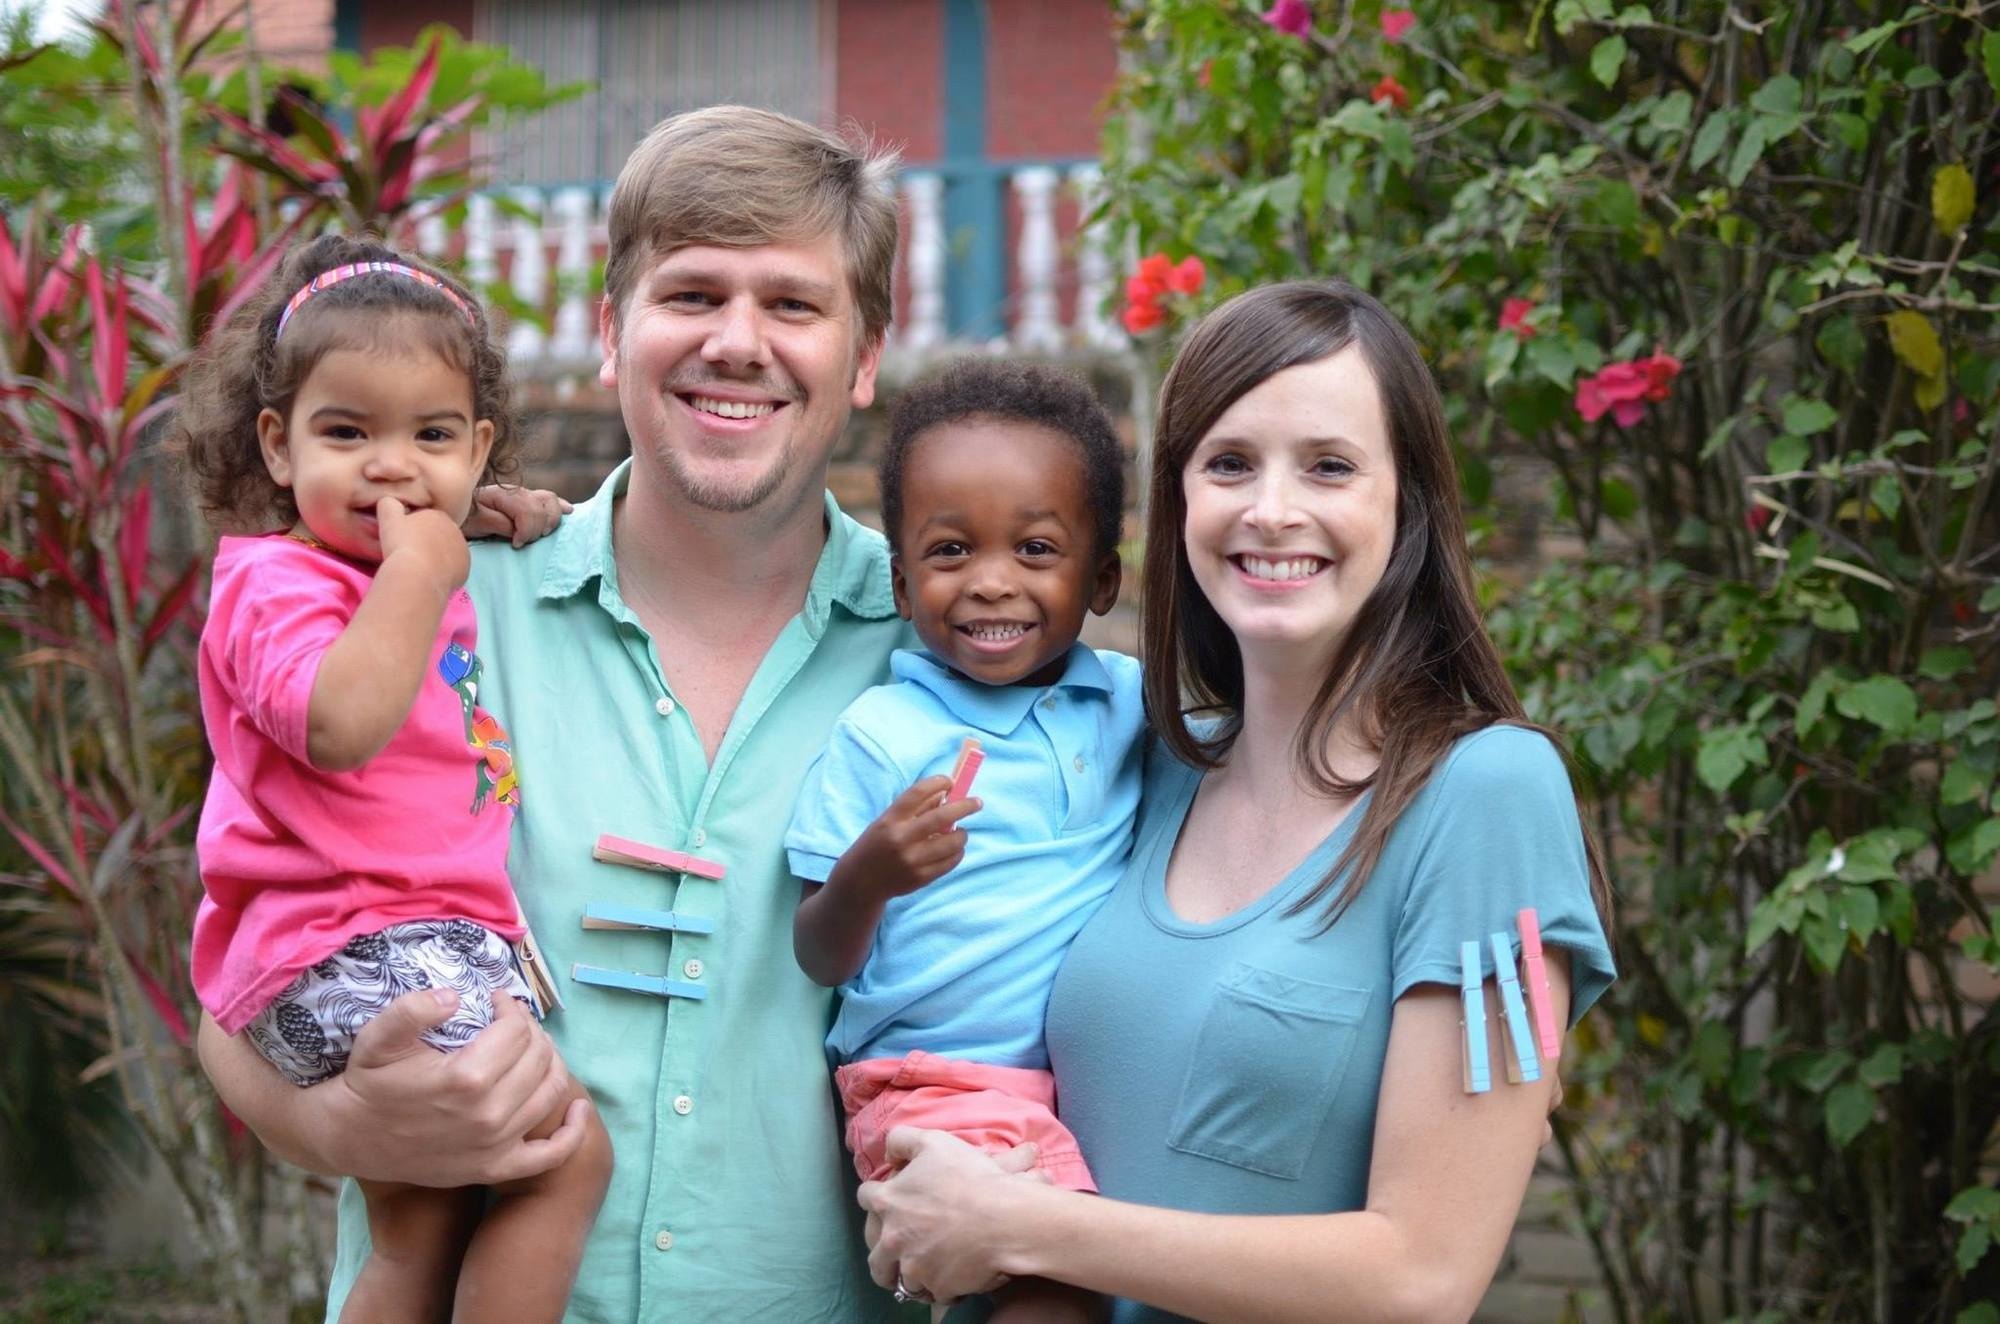 Aaron grew up in Honduras where his parents were evangelical missionaries in the Central American country.